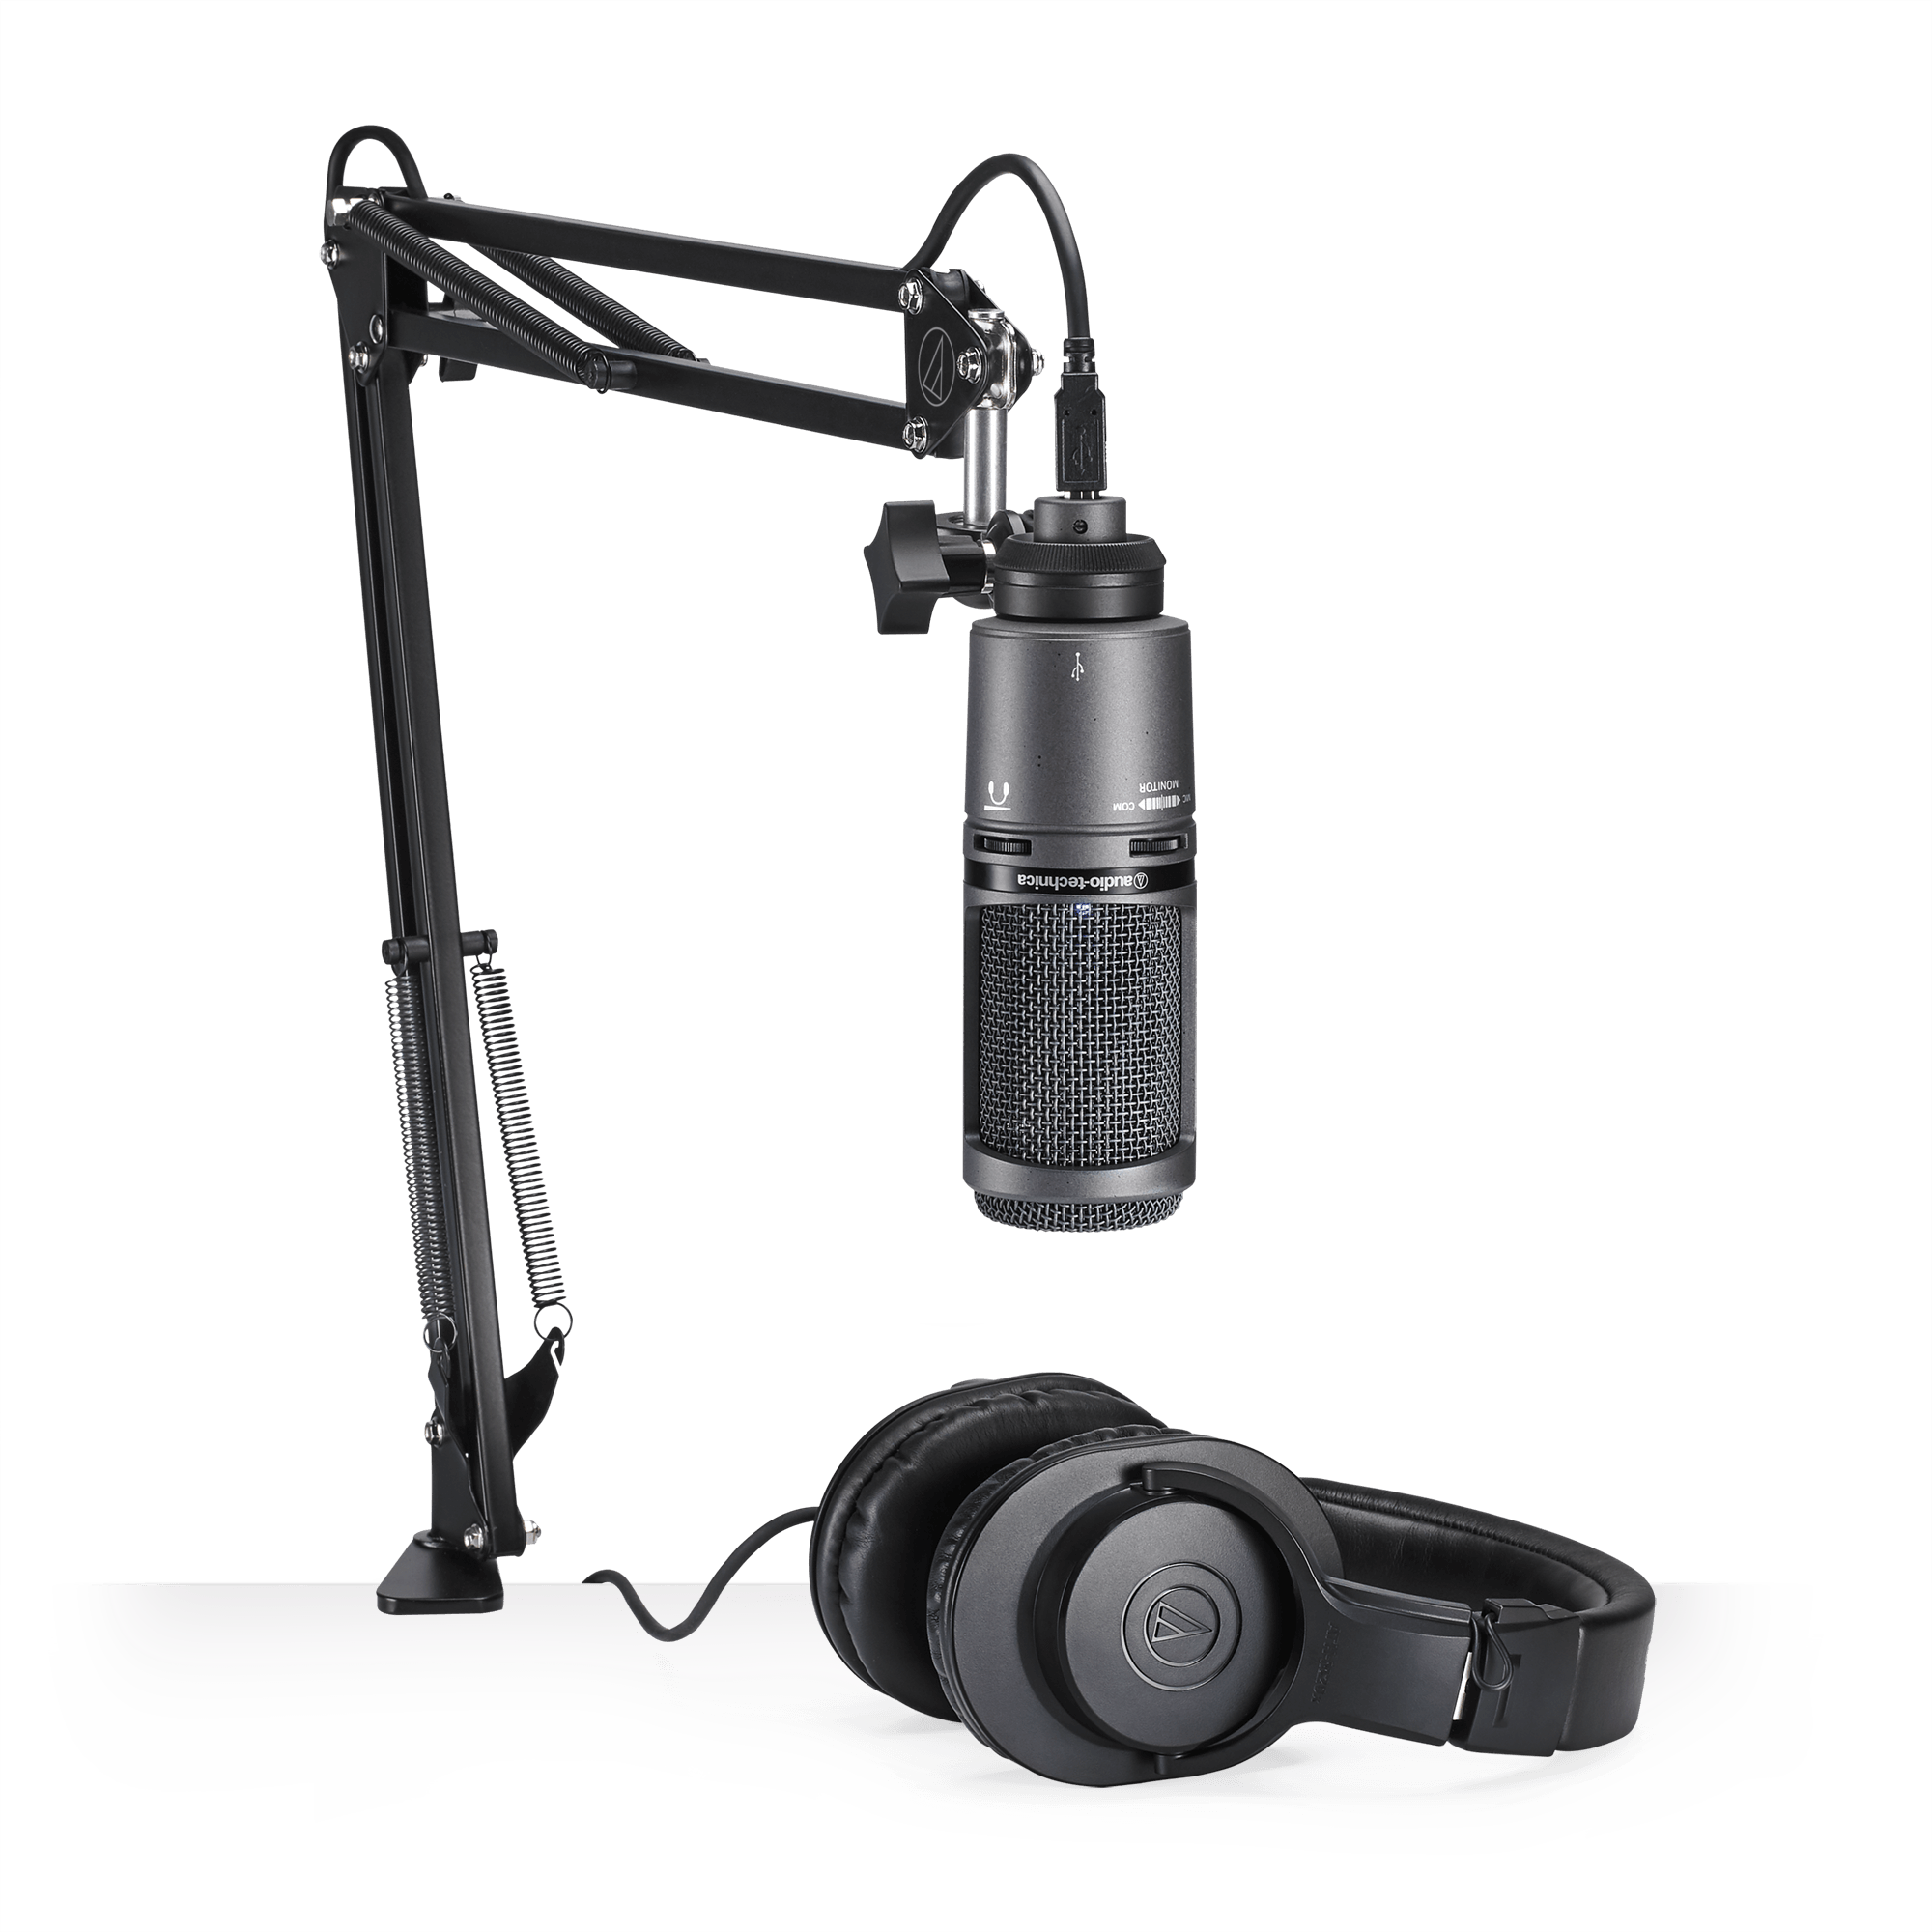 Audio-Technica Launches AT2020USB-XP Cardioid Condenser USB Microphone